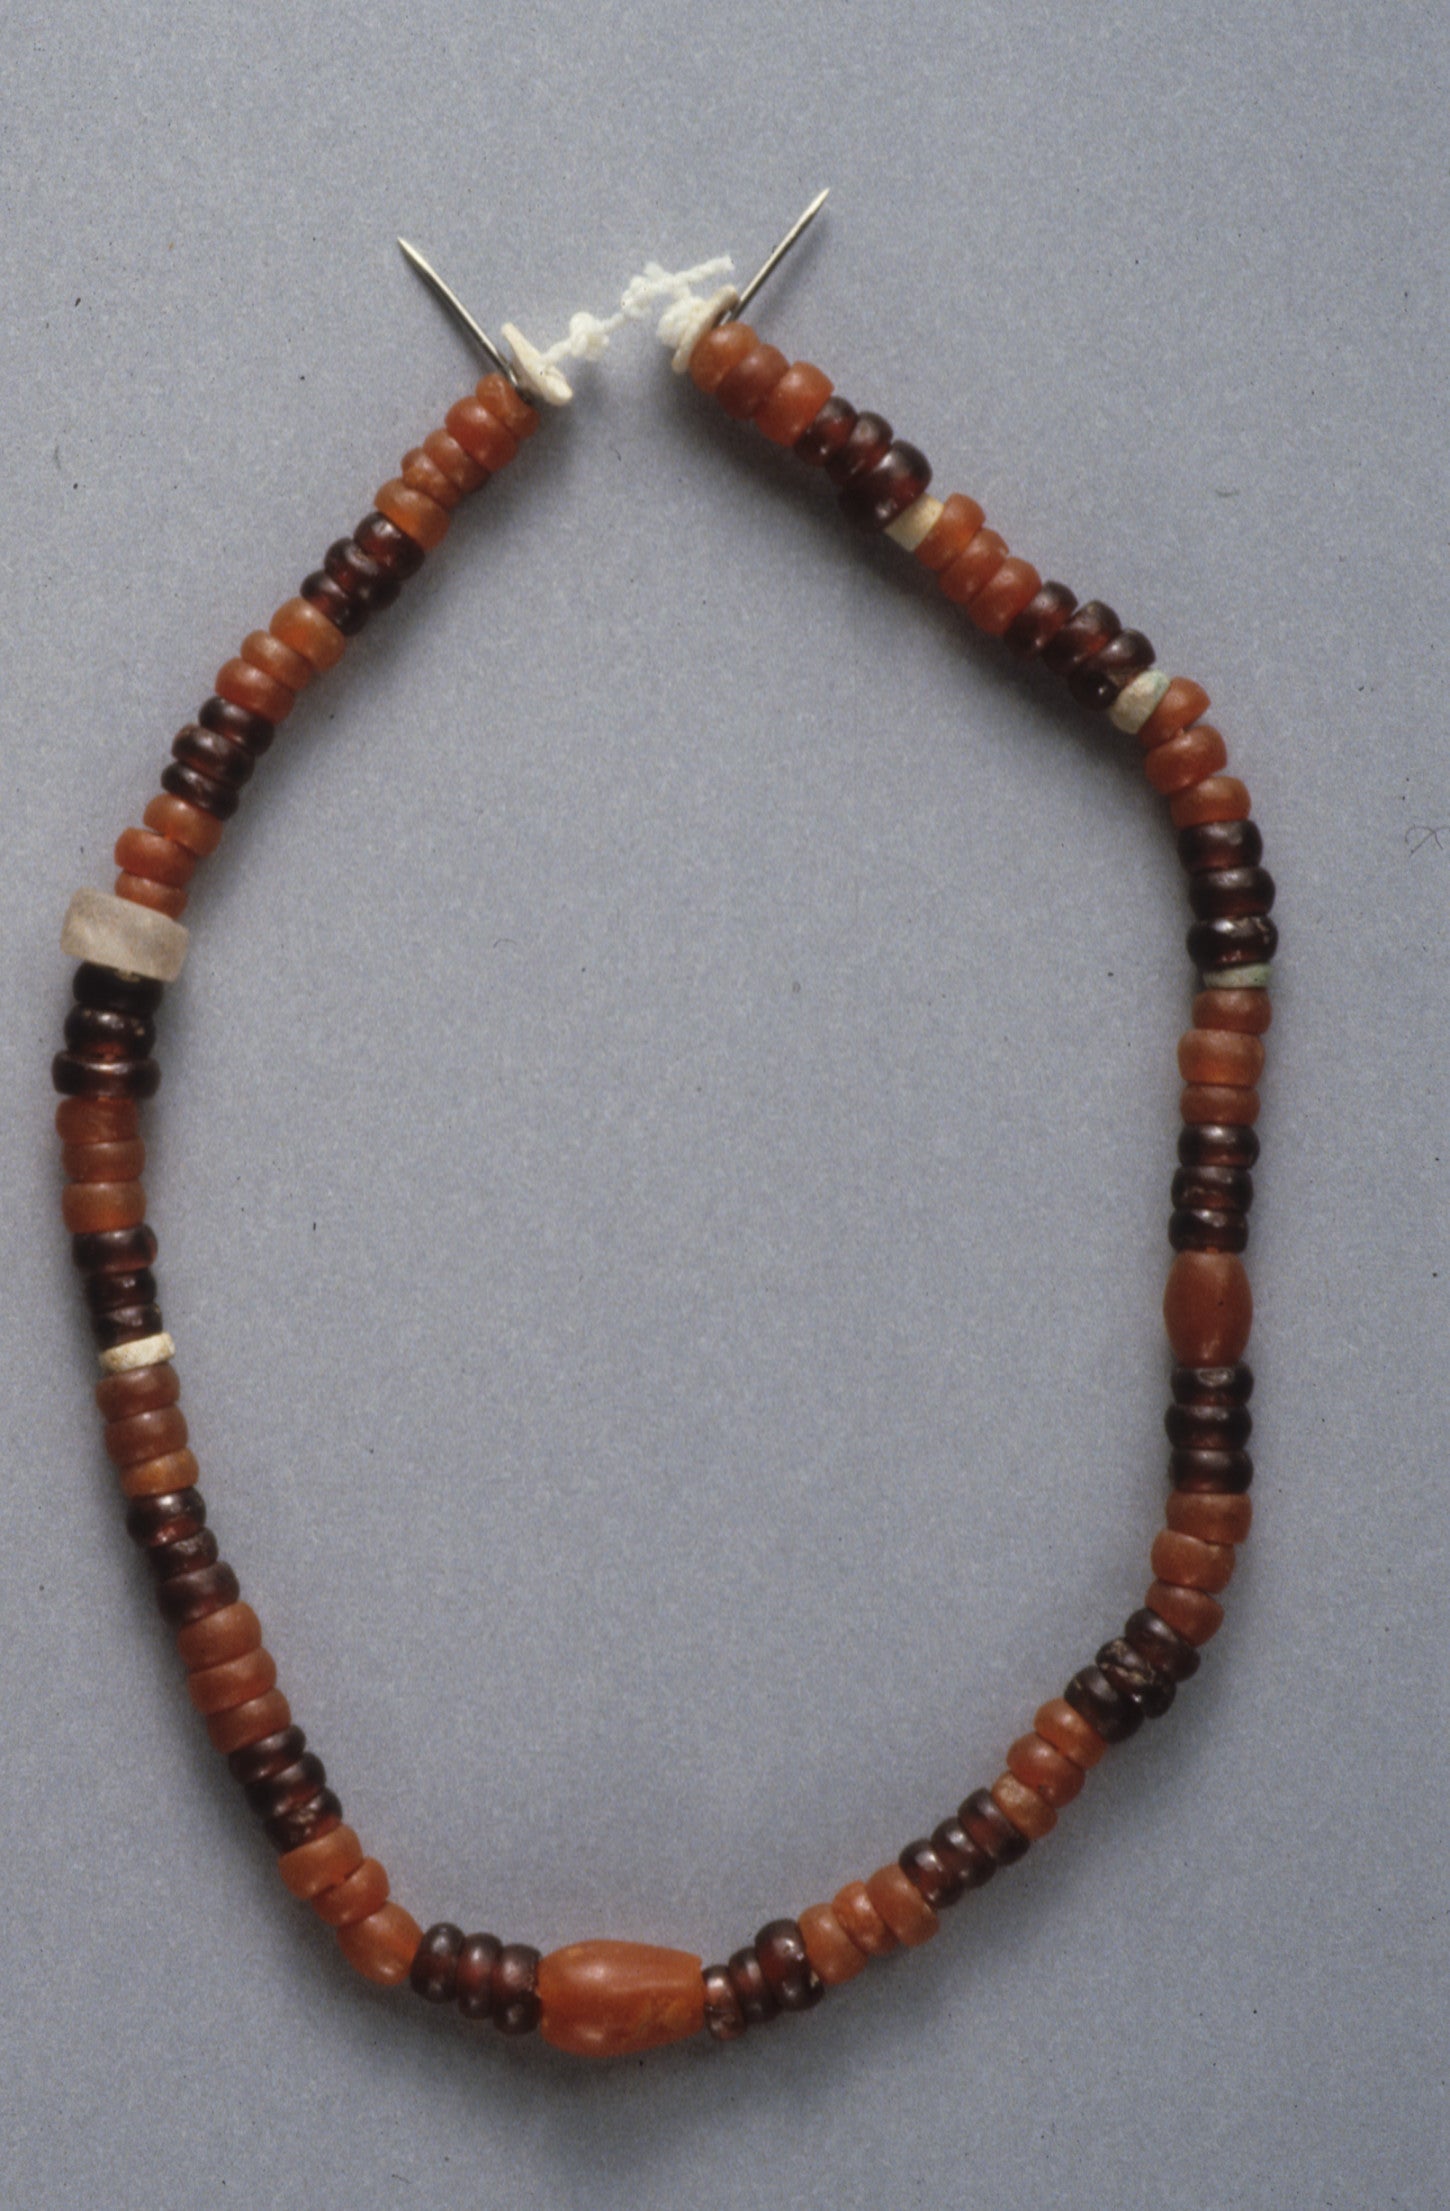 String of beads necklace